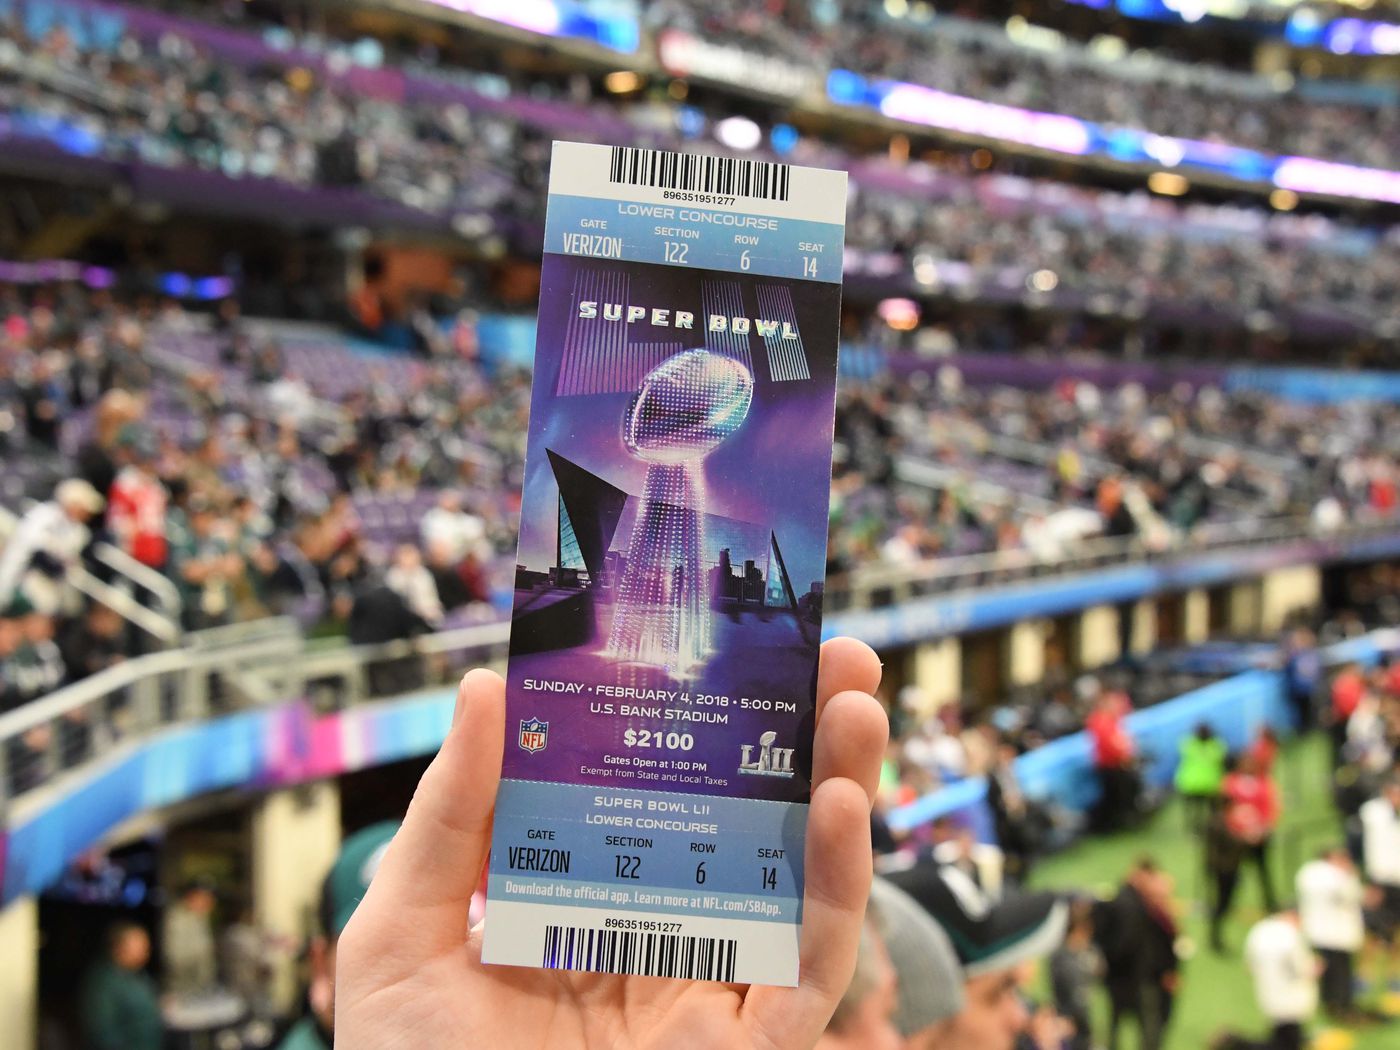 best site to buy super bowl tickets